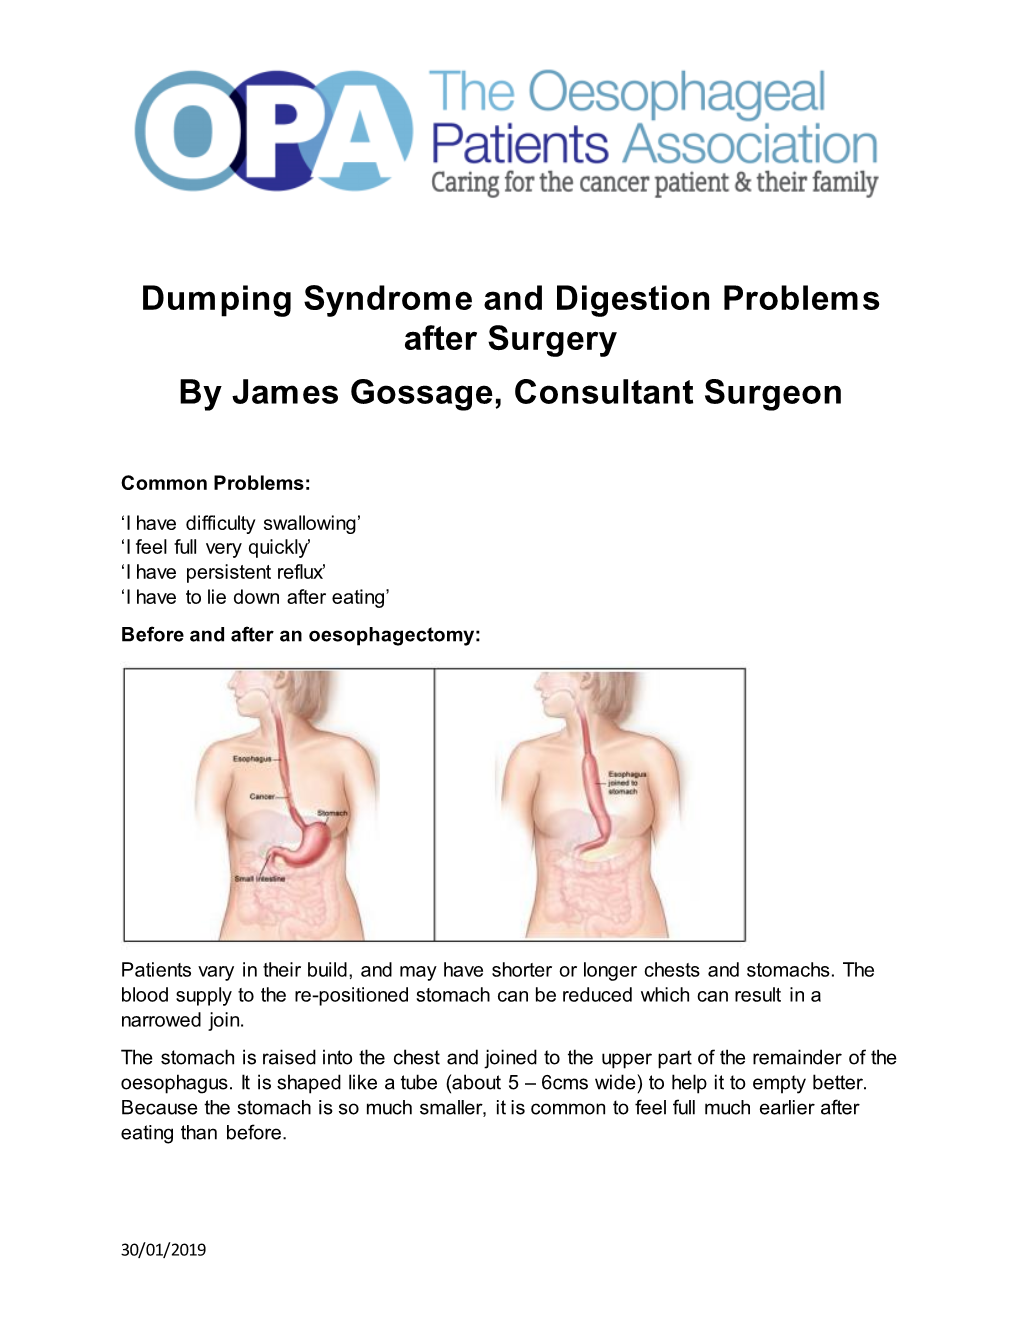 Dumping Syndrome and Digestion Problems After Surgery by James Gossage, Consultant Surgeon